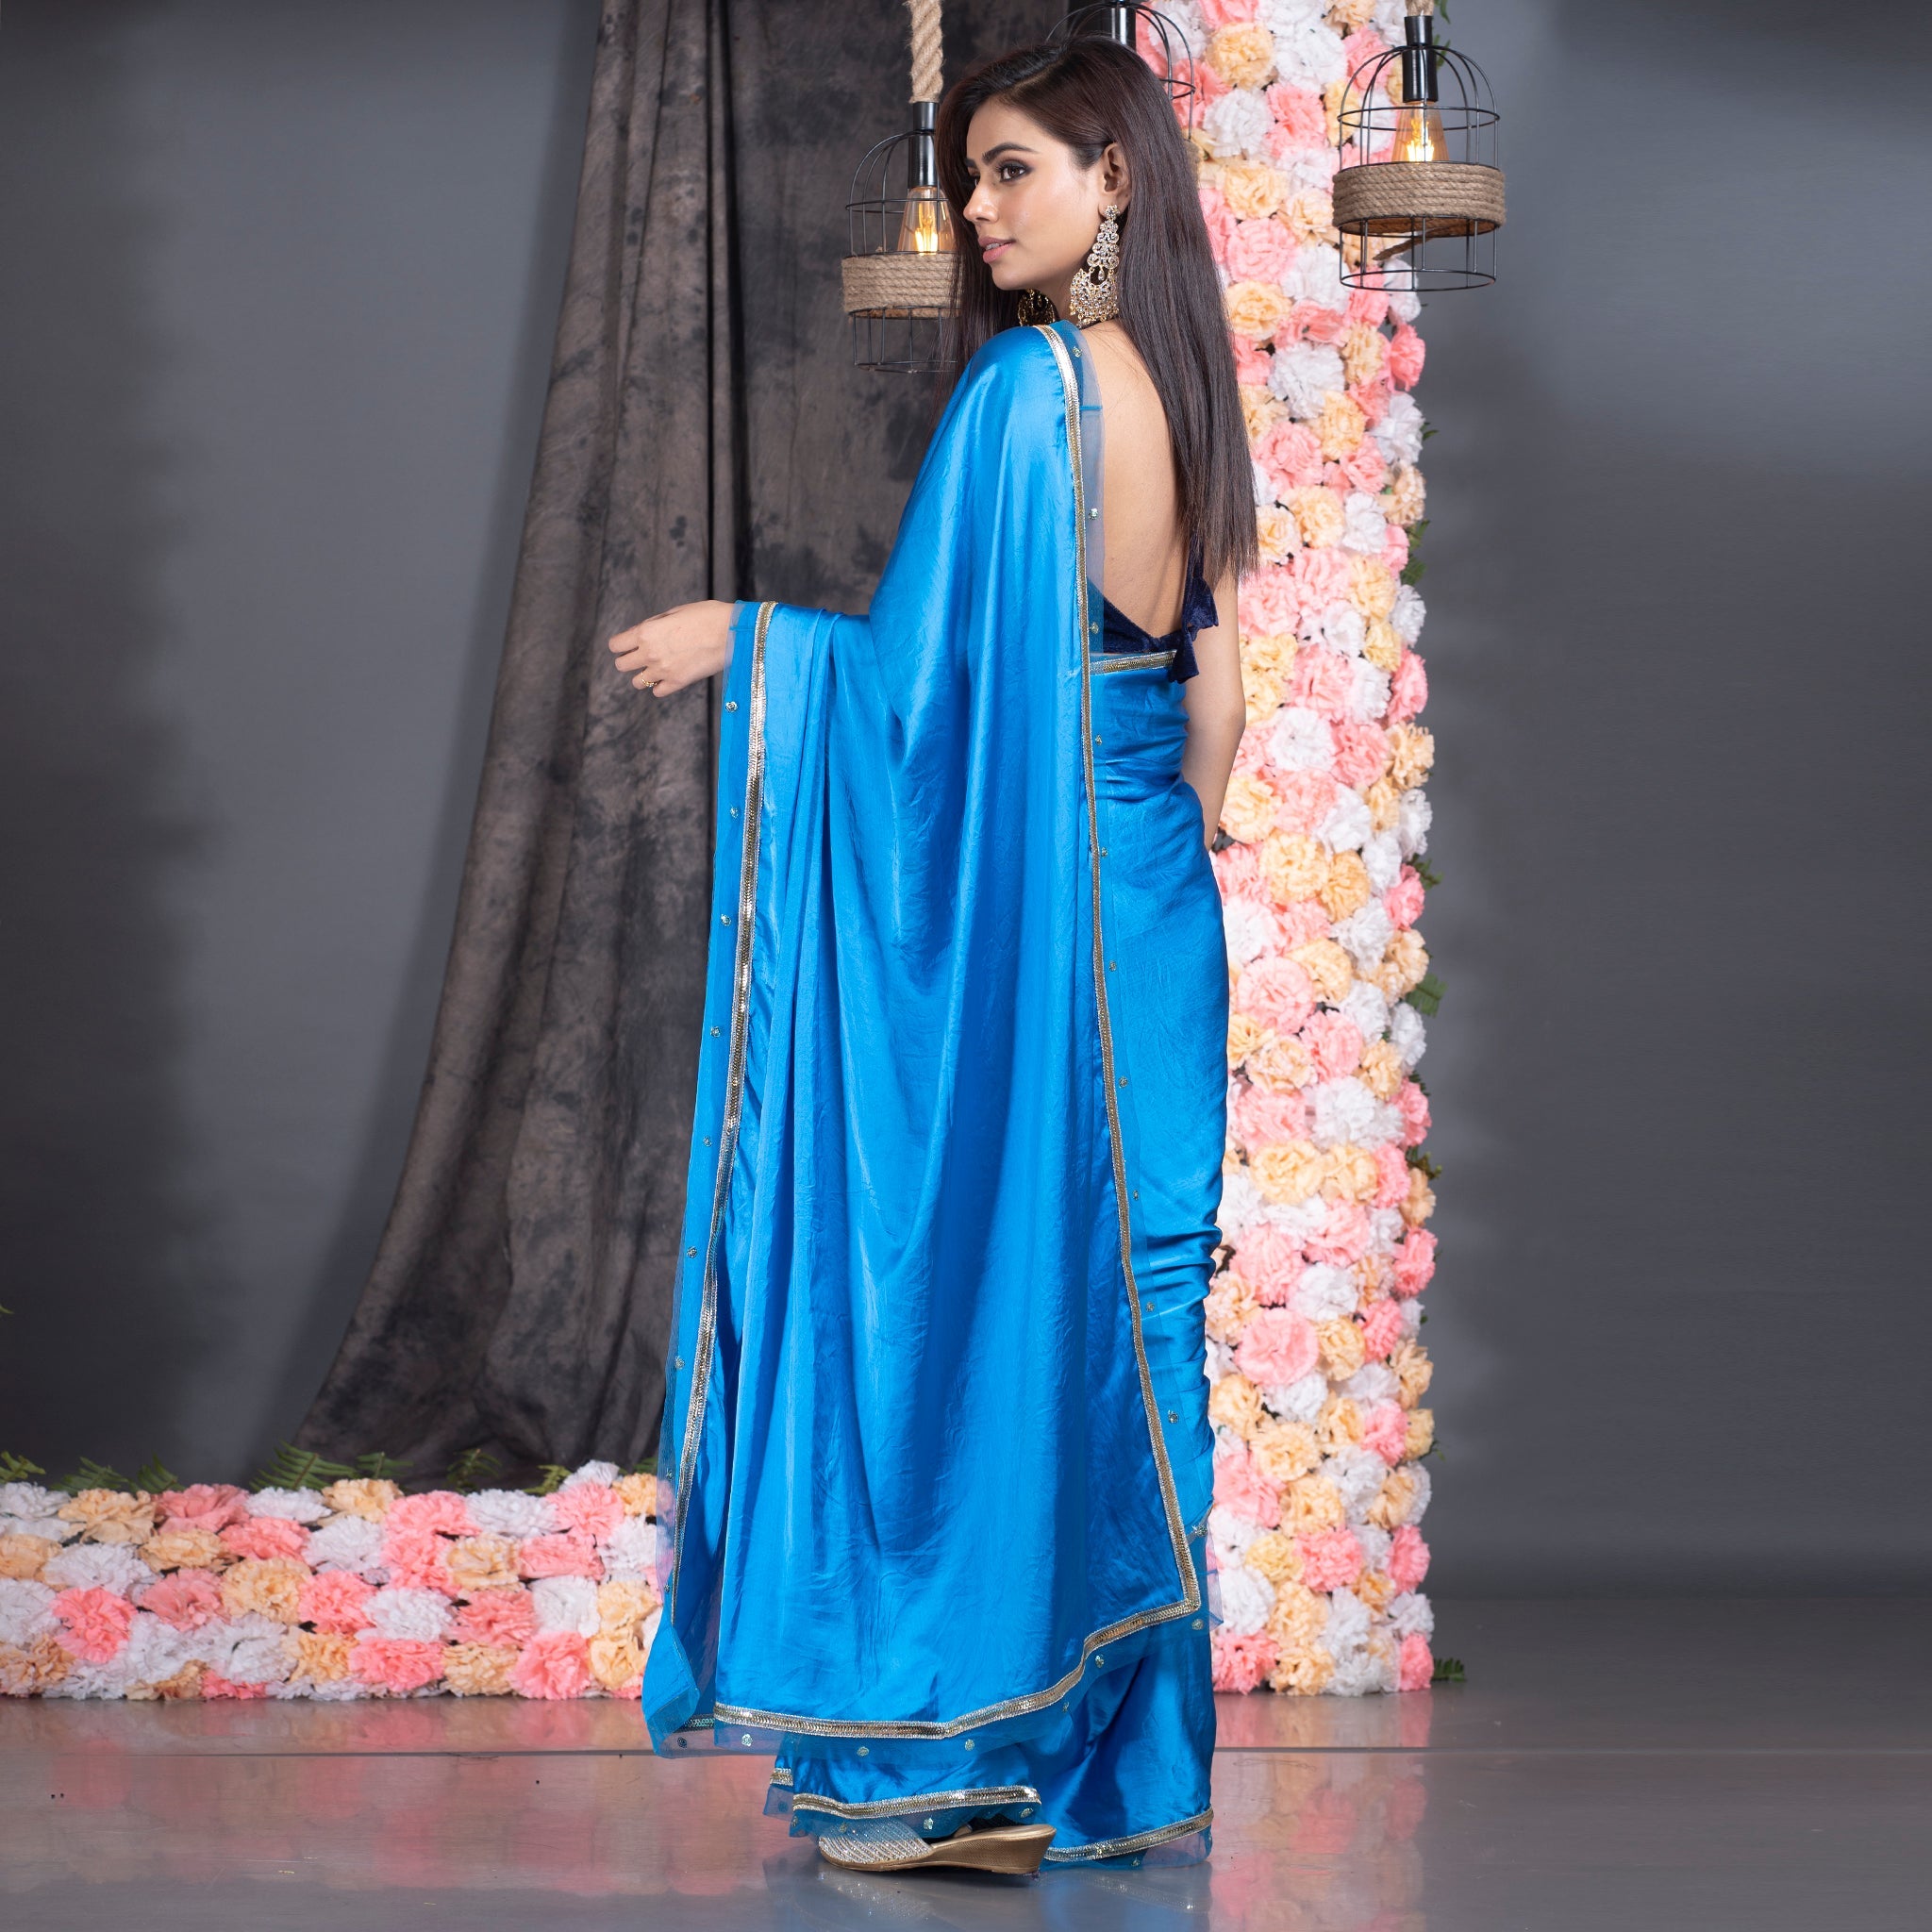 Women's Blue Satin Saree With Embroidered Border - Boveee